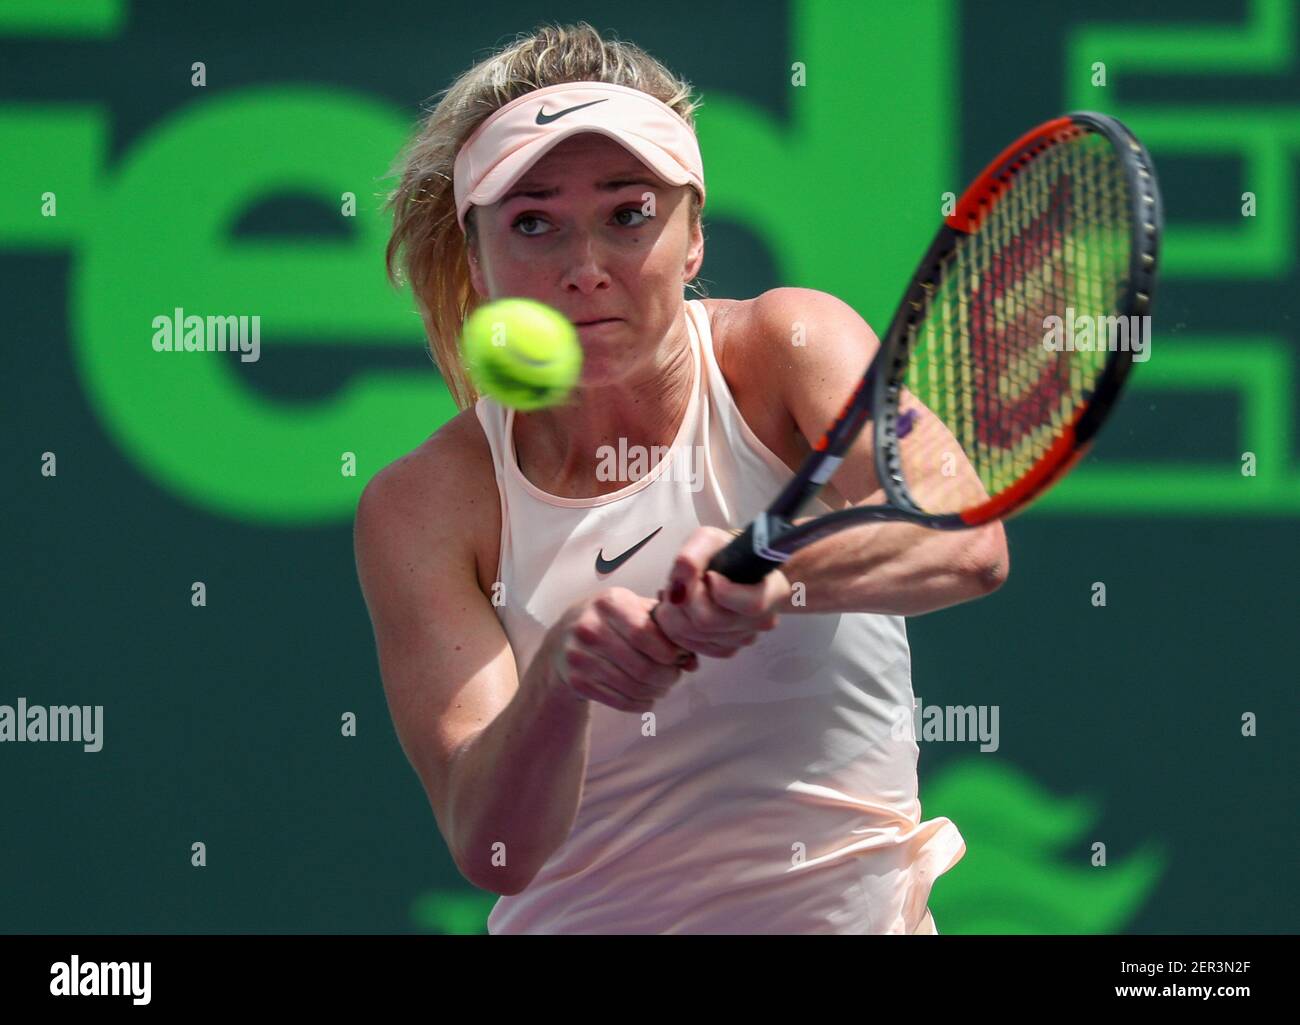 bevroren sigaar Verbinding March 28, 2018: Elina Svitolina of Ukraine hits a backhand against Jelena  Ostapenko of Latvia during at the 2018 Miami Open presented by Itau  professional tennis tournament, played at the Crandon Park